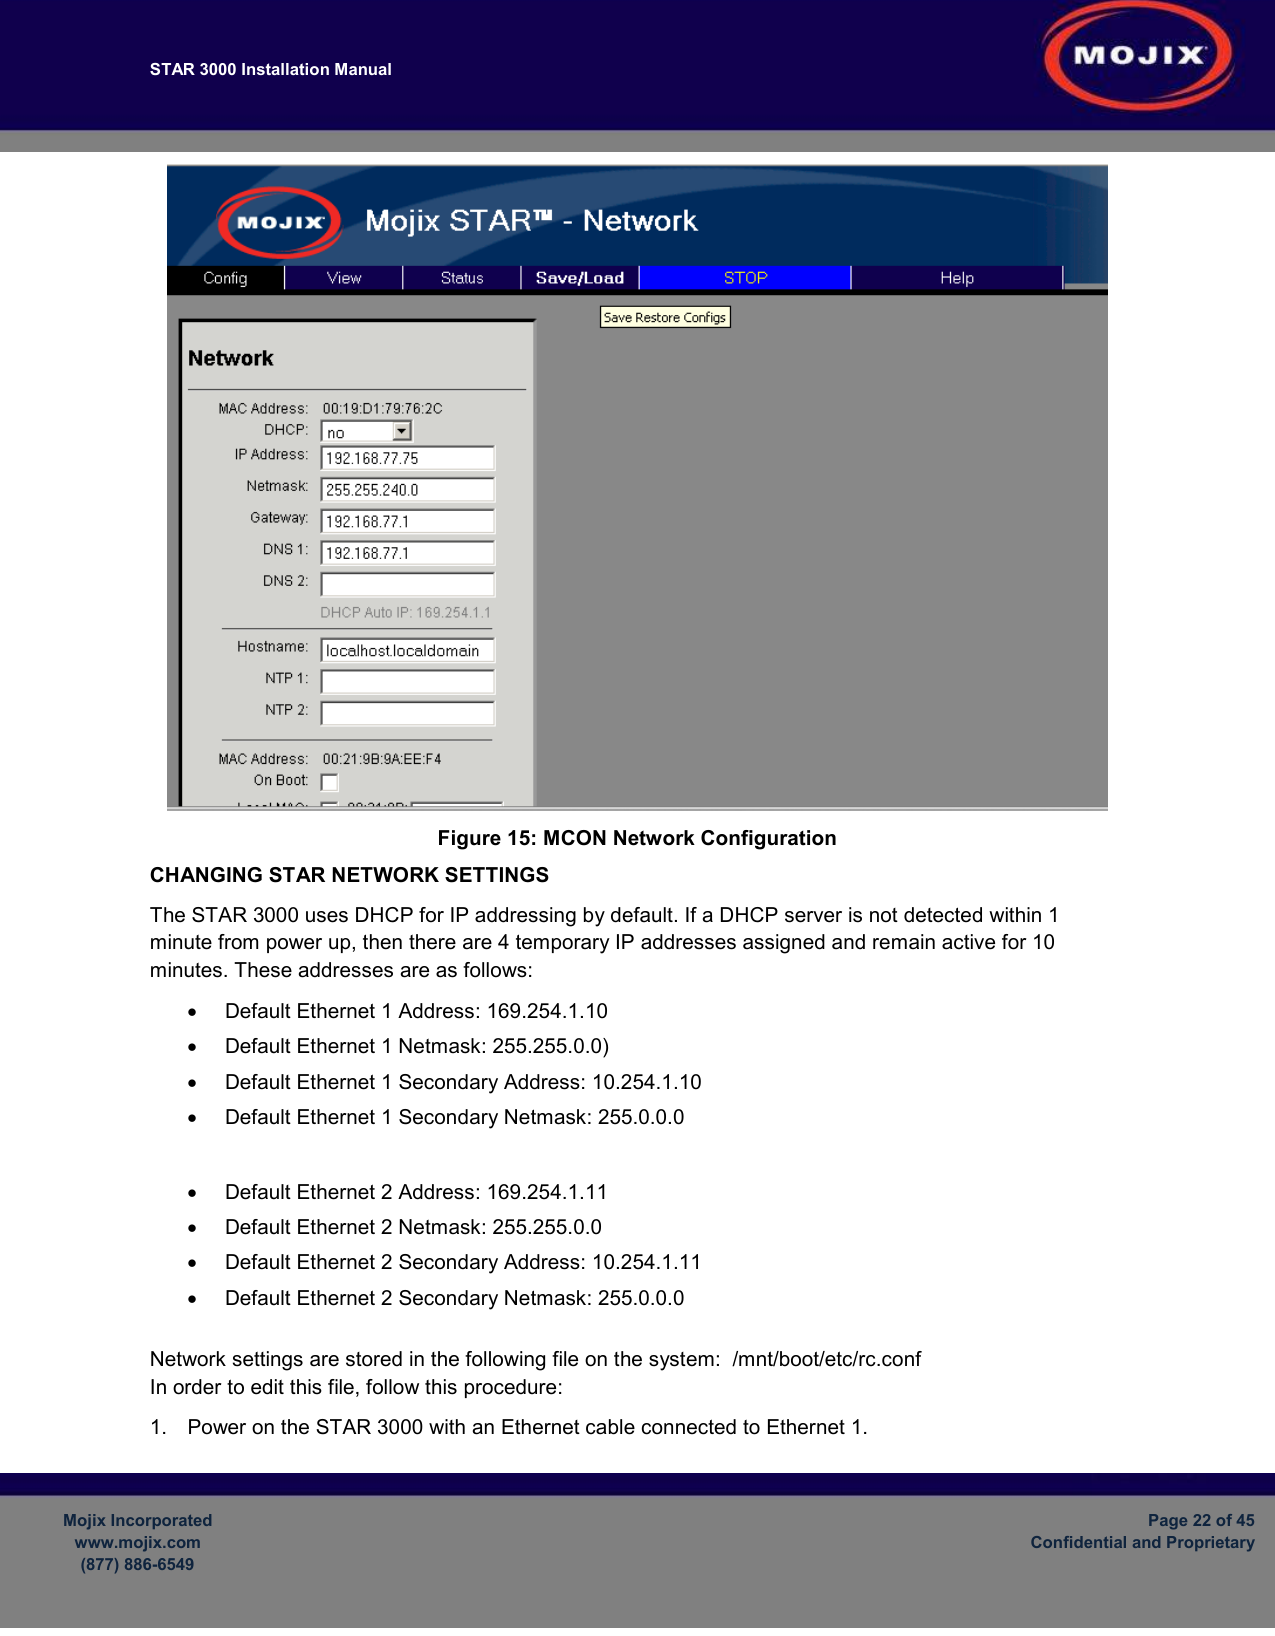 STAR 3000 Installation Manual         Mojix Incorporated www.mojix.com (877) 886-6549  Page 22 of 45 Confidential and Proprietary   Figure 15: MCON Network Configuration CHANGING STAR NETWORK SETTINGS The STAR 3000 uses DHCP for IP addressing by default. If a DHCP server is not detected within 1 minute from power up, then there are 4 temporary IP addresses assigned and remain active for 10 minutes. These addresses are as follows: •  Default Ethernet 1 Address: 169.254.1.10 •  Default Ethernet 1 Netmask: 255.255.0.0) •  Default Ethernet 1 Secondary Address: 10.254.1.10 •  Default Ethernet 1 Secondary Netmask: 255.0.0.0  •  Default Ethernet 2 Address: 169.254.1.11 •  Default Ethernet 2 Netmask: 255.255.0.0 •  Default Ethernet 2 Secondary Address: 10.254.1.11 •  Default Ethernet 2 Secondary Netmask: 255.0.0.0  Network settings are stored in the following file on the system:  /mnt/boot/etc/rc.conf In order to edit this file, follow this procedure: 1.  Power on the STAR 3000 with an Ethernet cable connected to Ethernet 1.  